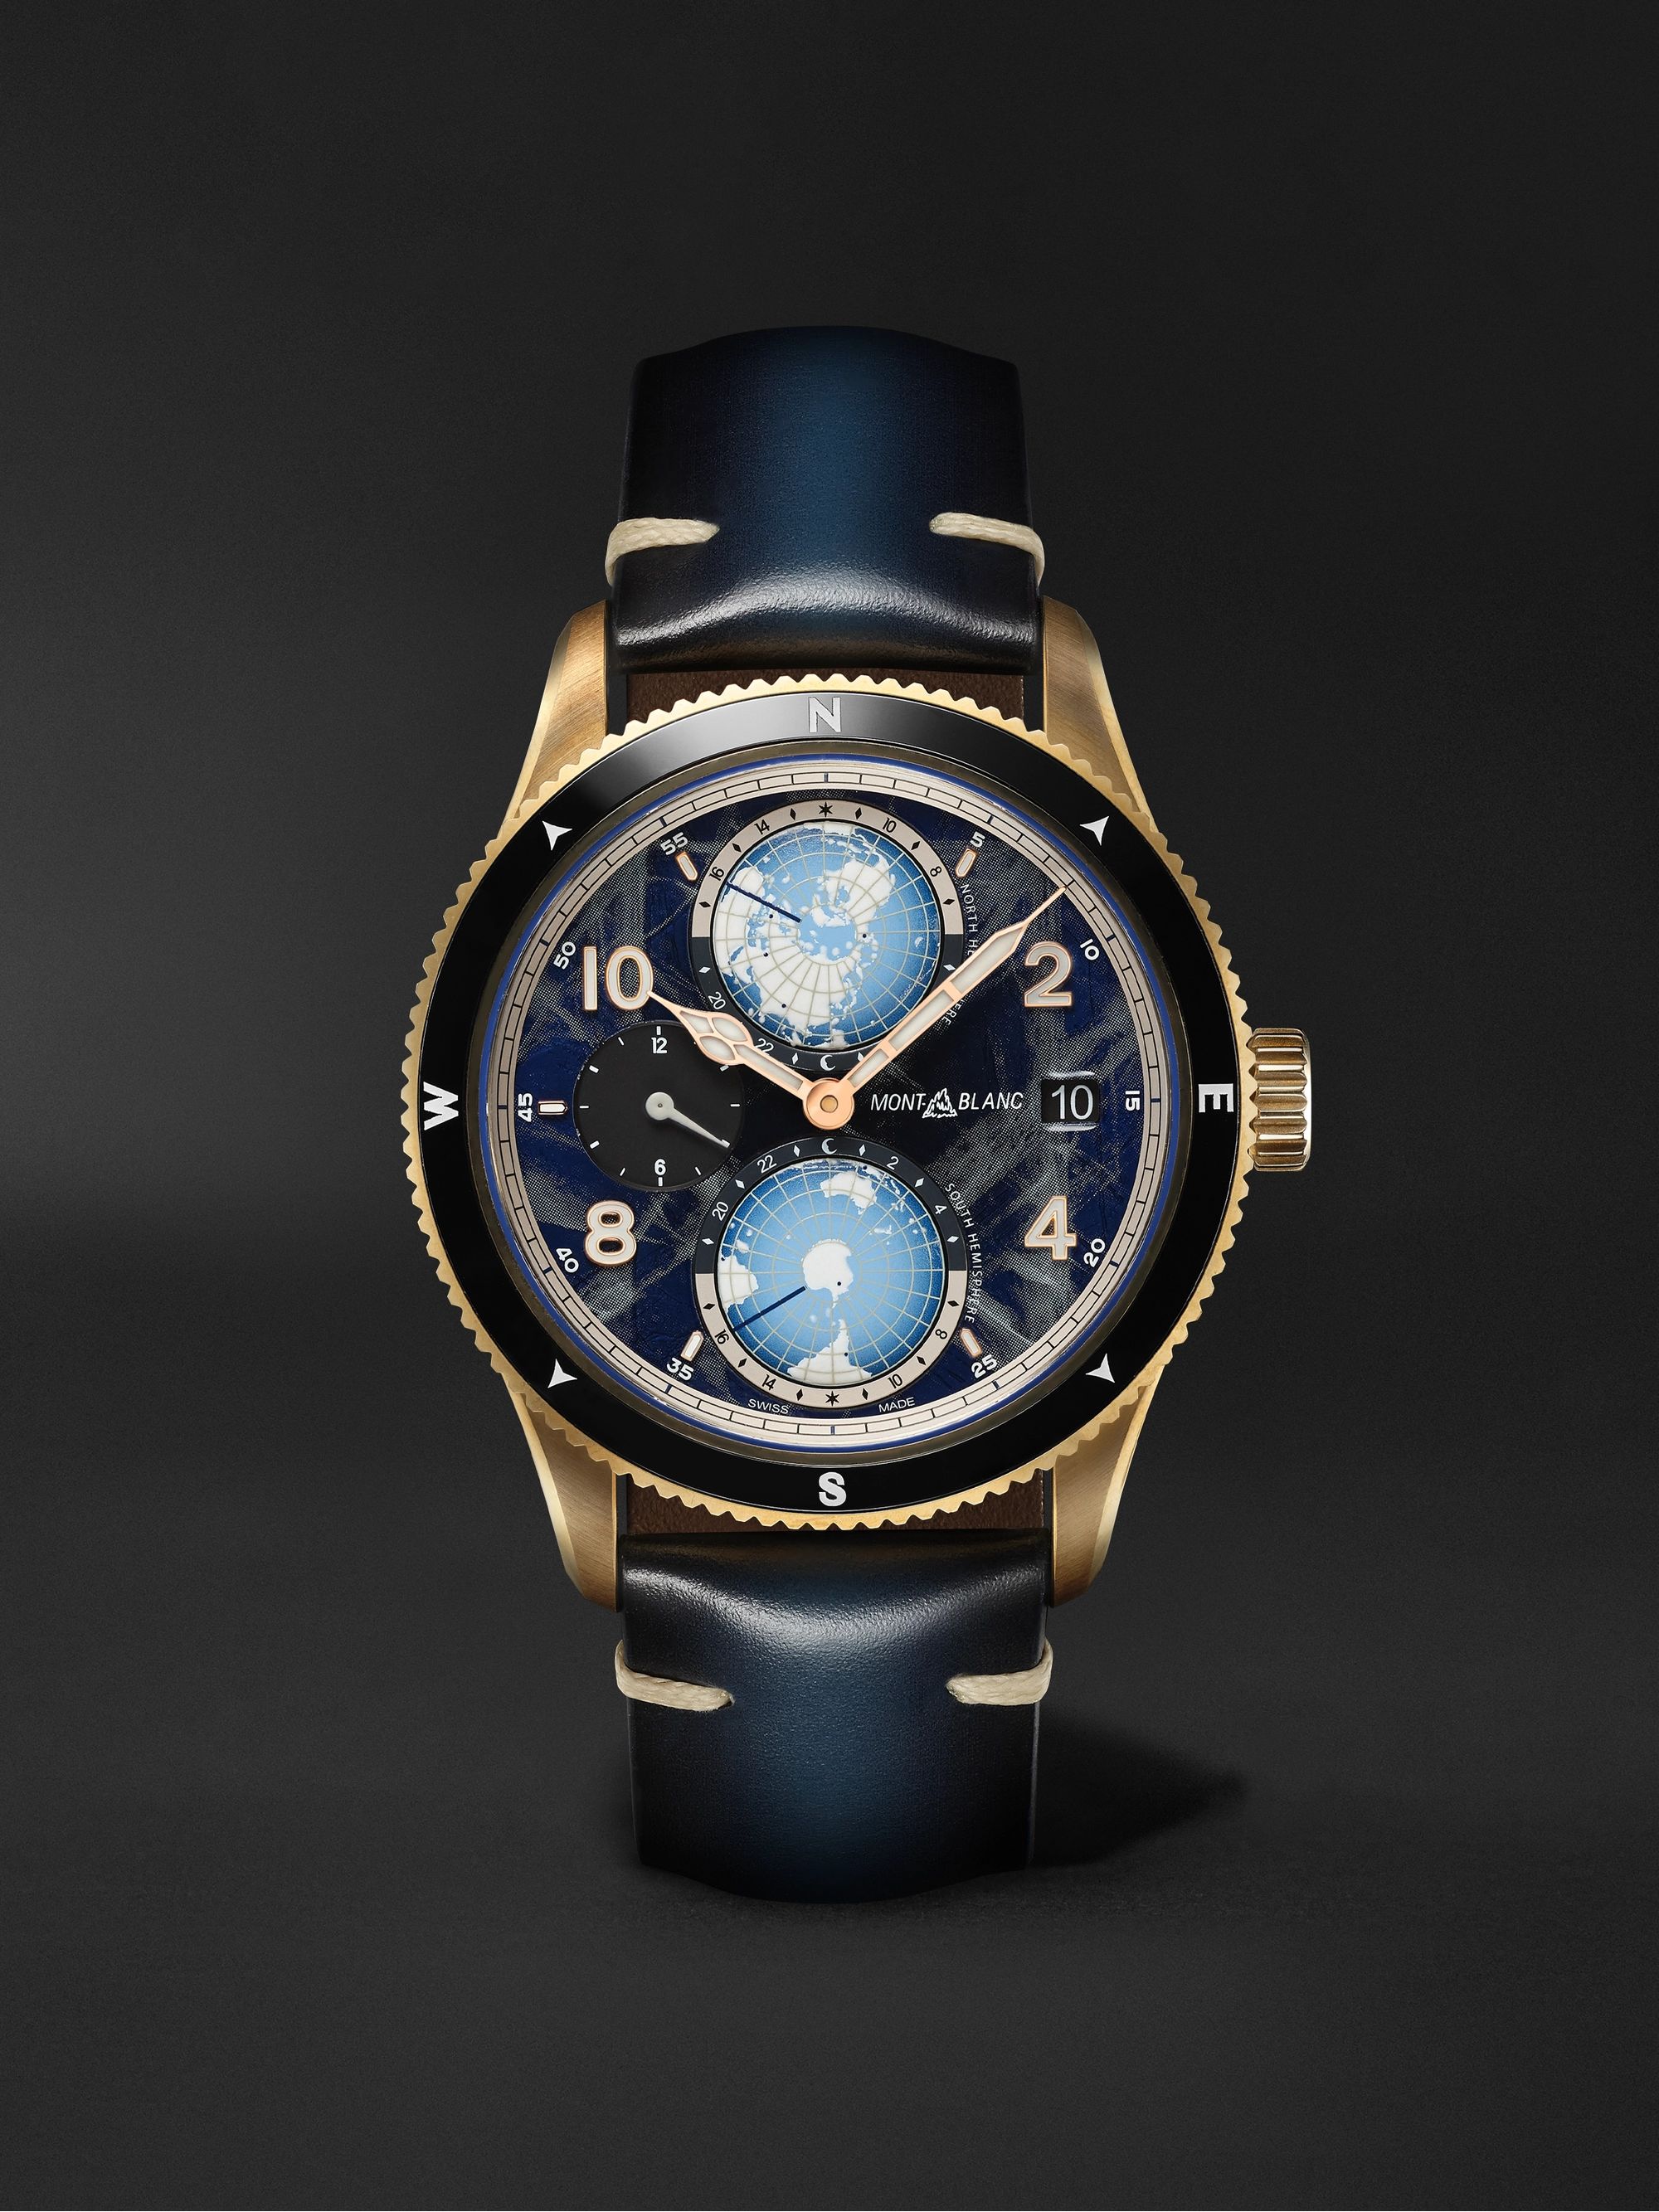 MONTBLANC 1858 Geosphere 0 Oxygen Limited Edition Automatic GMT 42mm  Bronze, Ceramic and Leather Watch, Ref. No. 129415 | MR PORTER